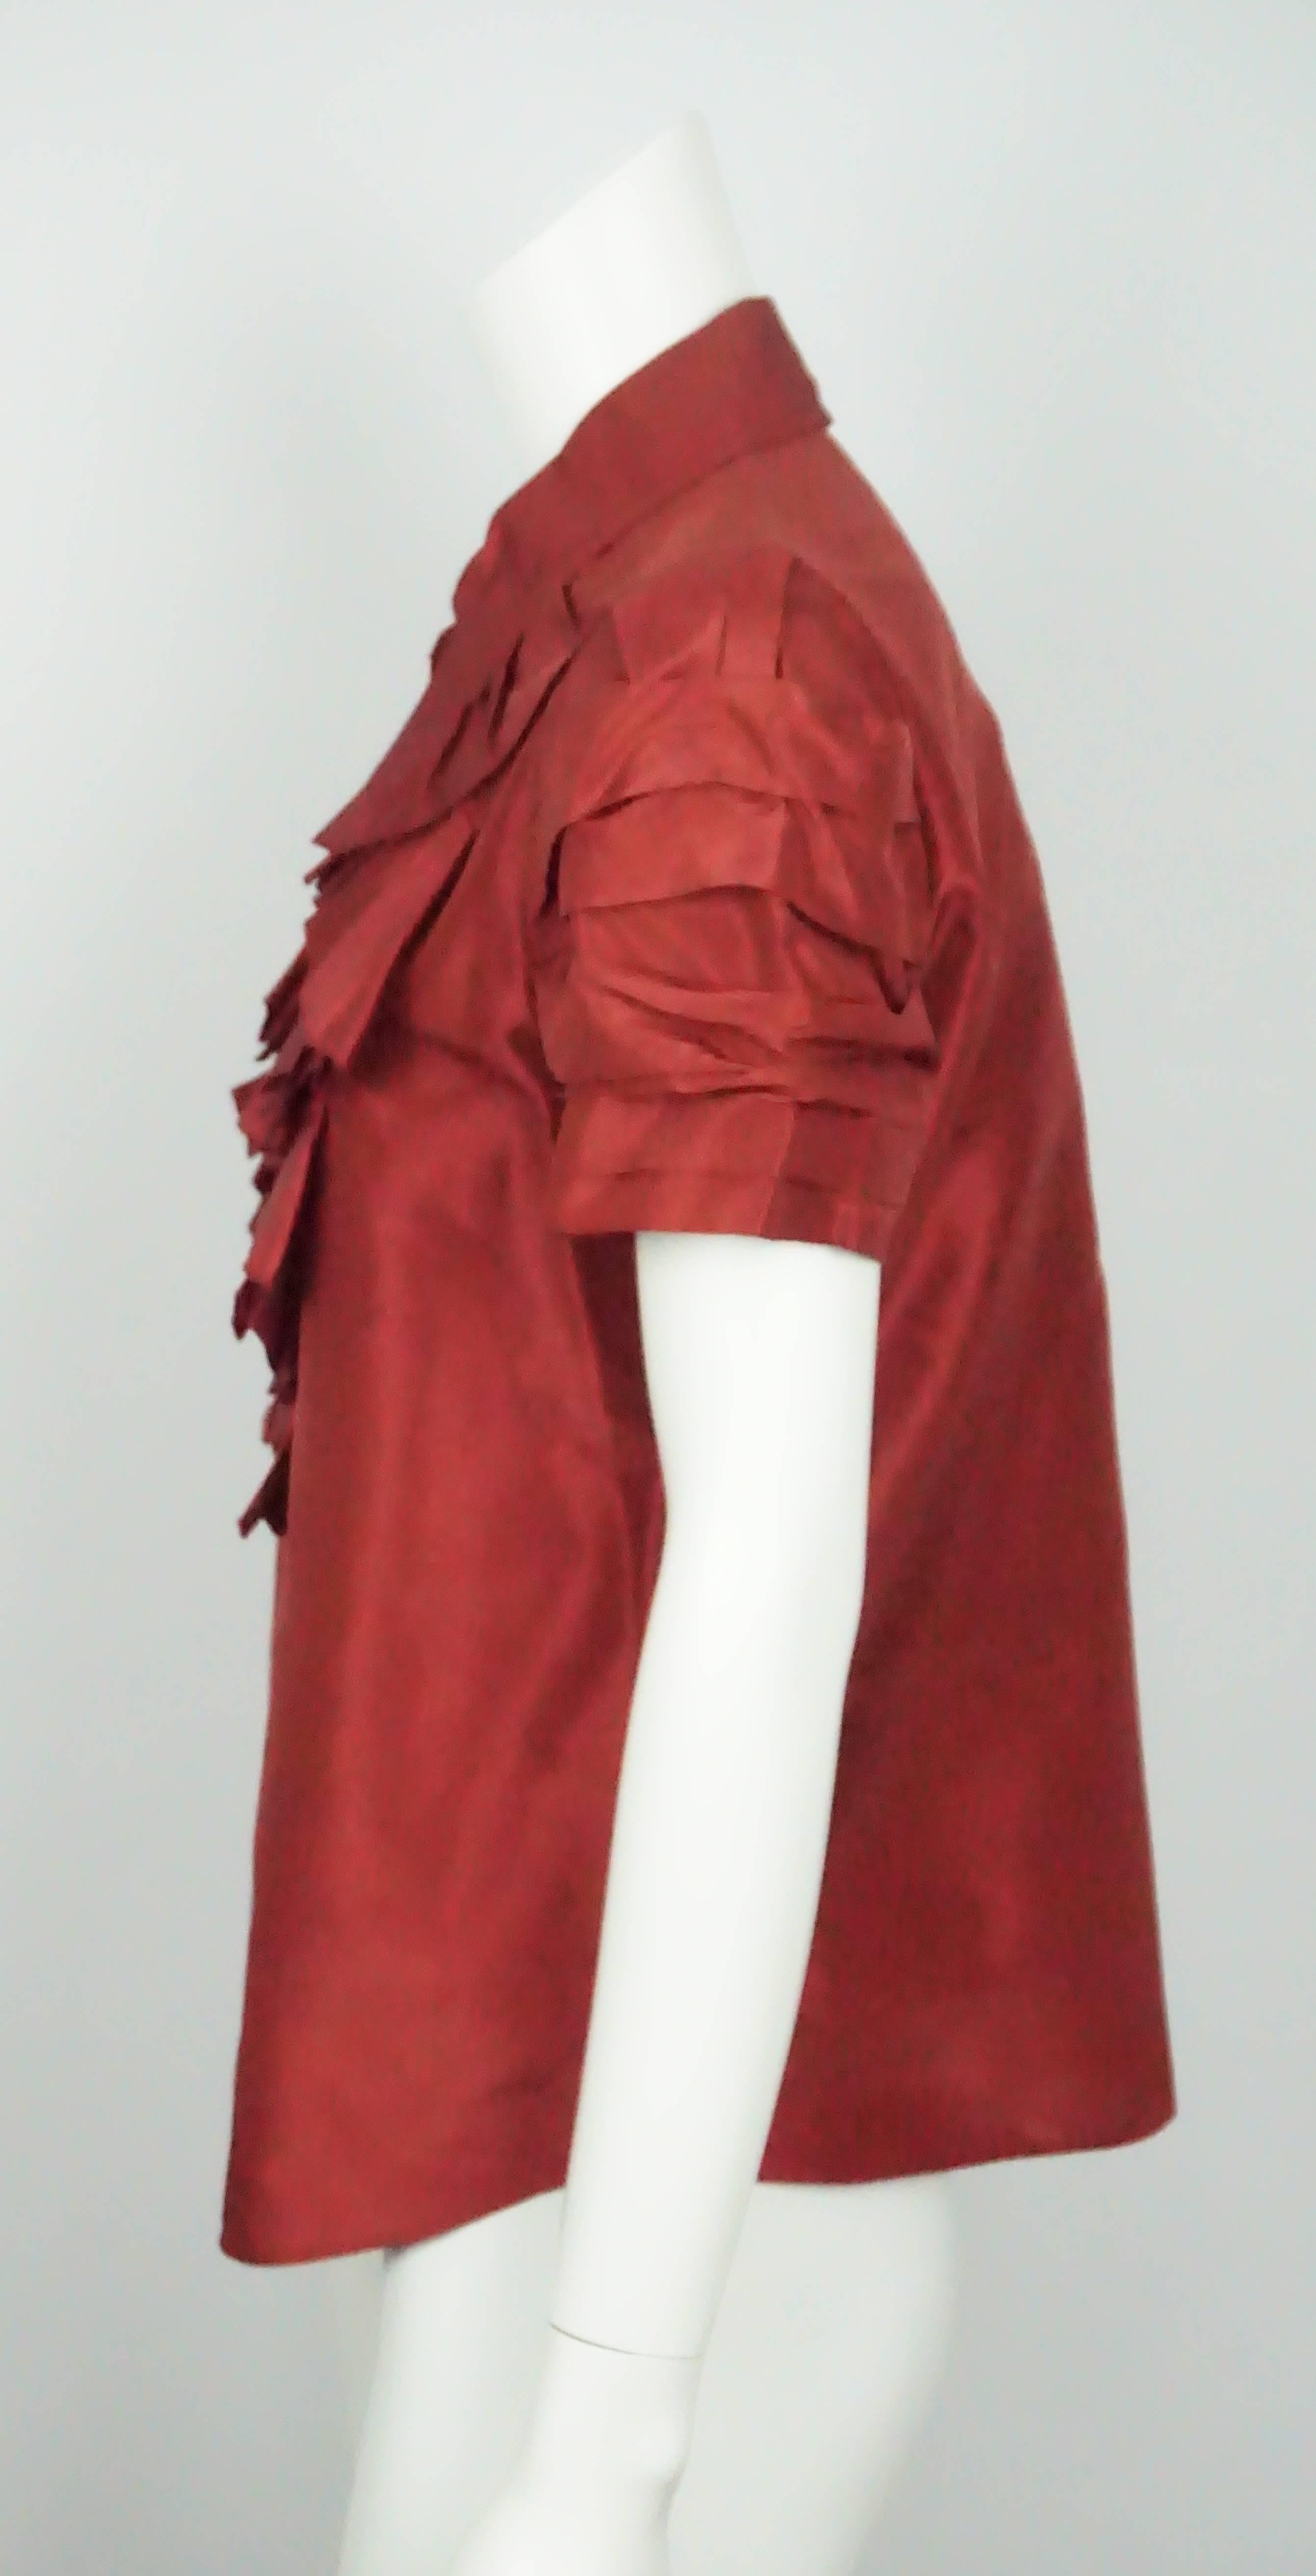 Oscar Burgundy Silk Taffeta S/S Ruffled Top-8. This stunning Oscar De La Renta top is in great condition. It is a burgundy/red color and is made of silk. It has short sleeves and ruffle details on the front and sleeves. There are gold and red